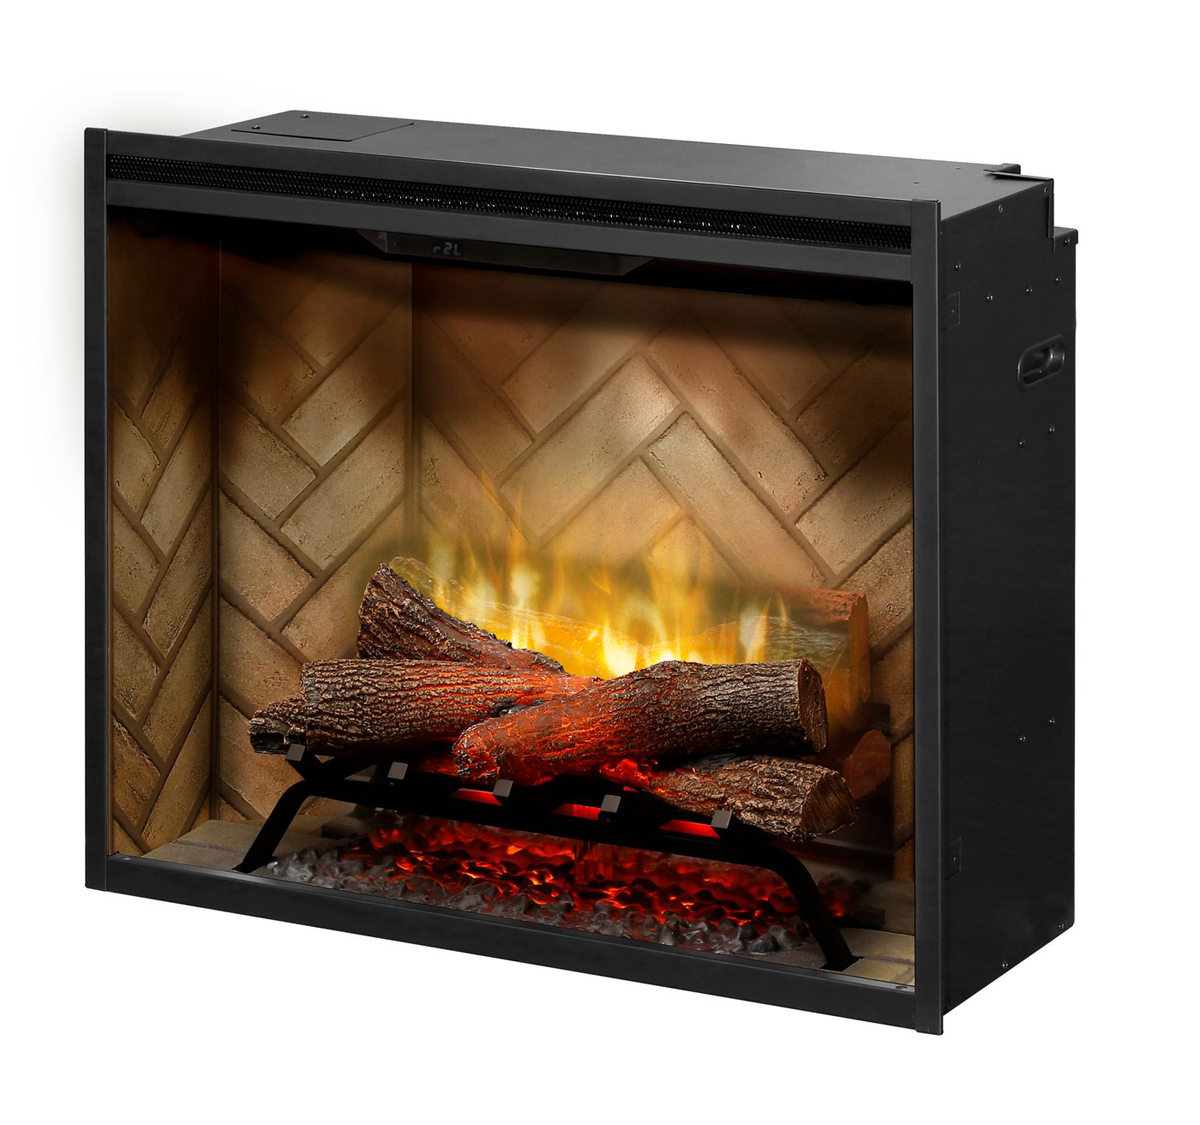 revillusion 30 inch built-in electic firebox/fireplace insert with herringbone brick interior product image